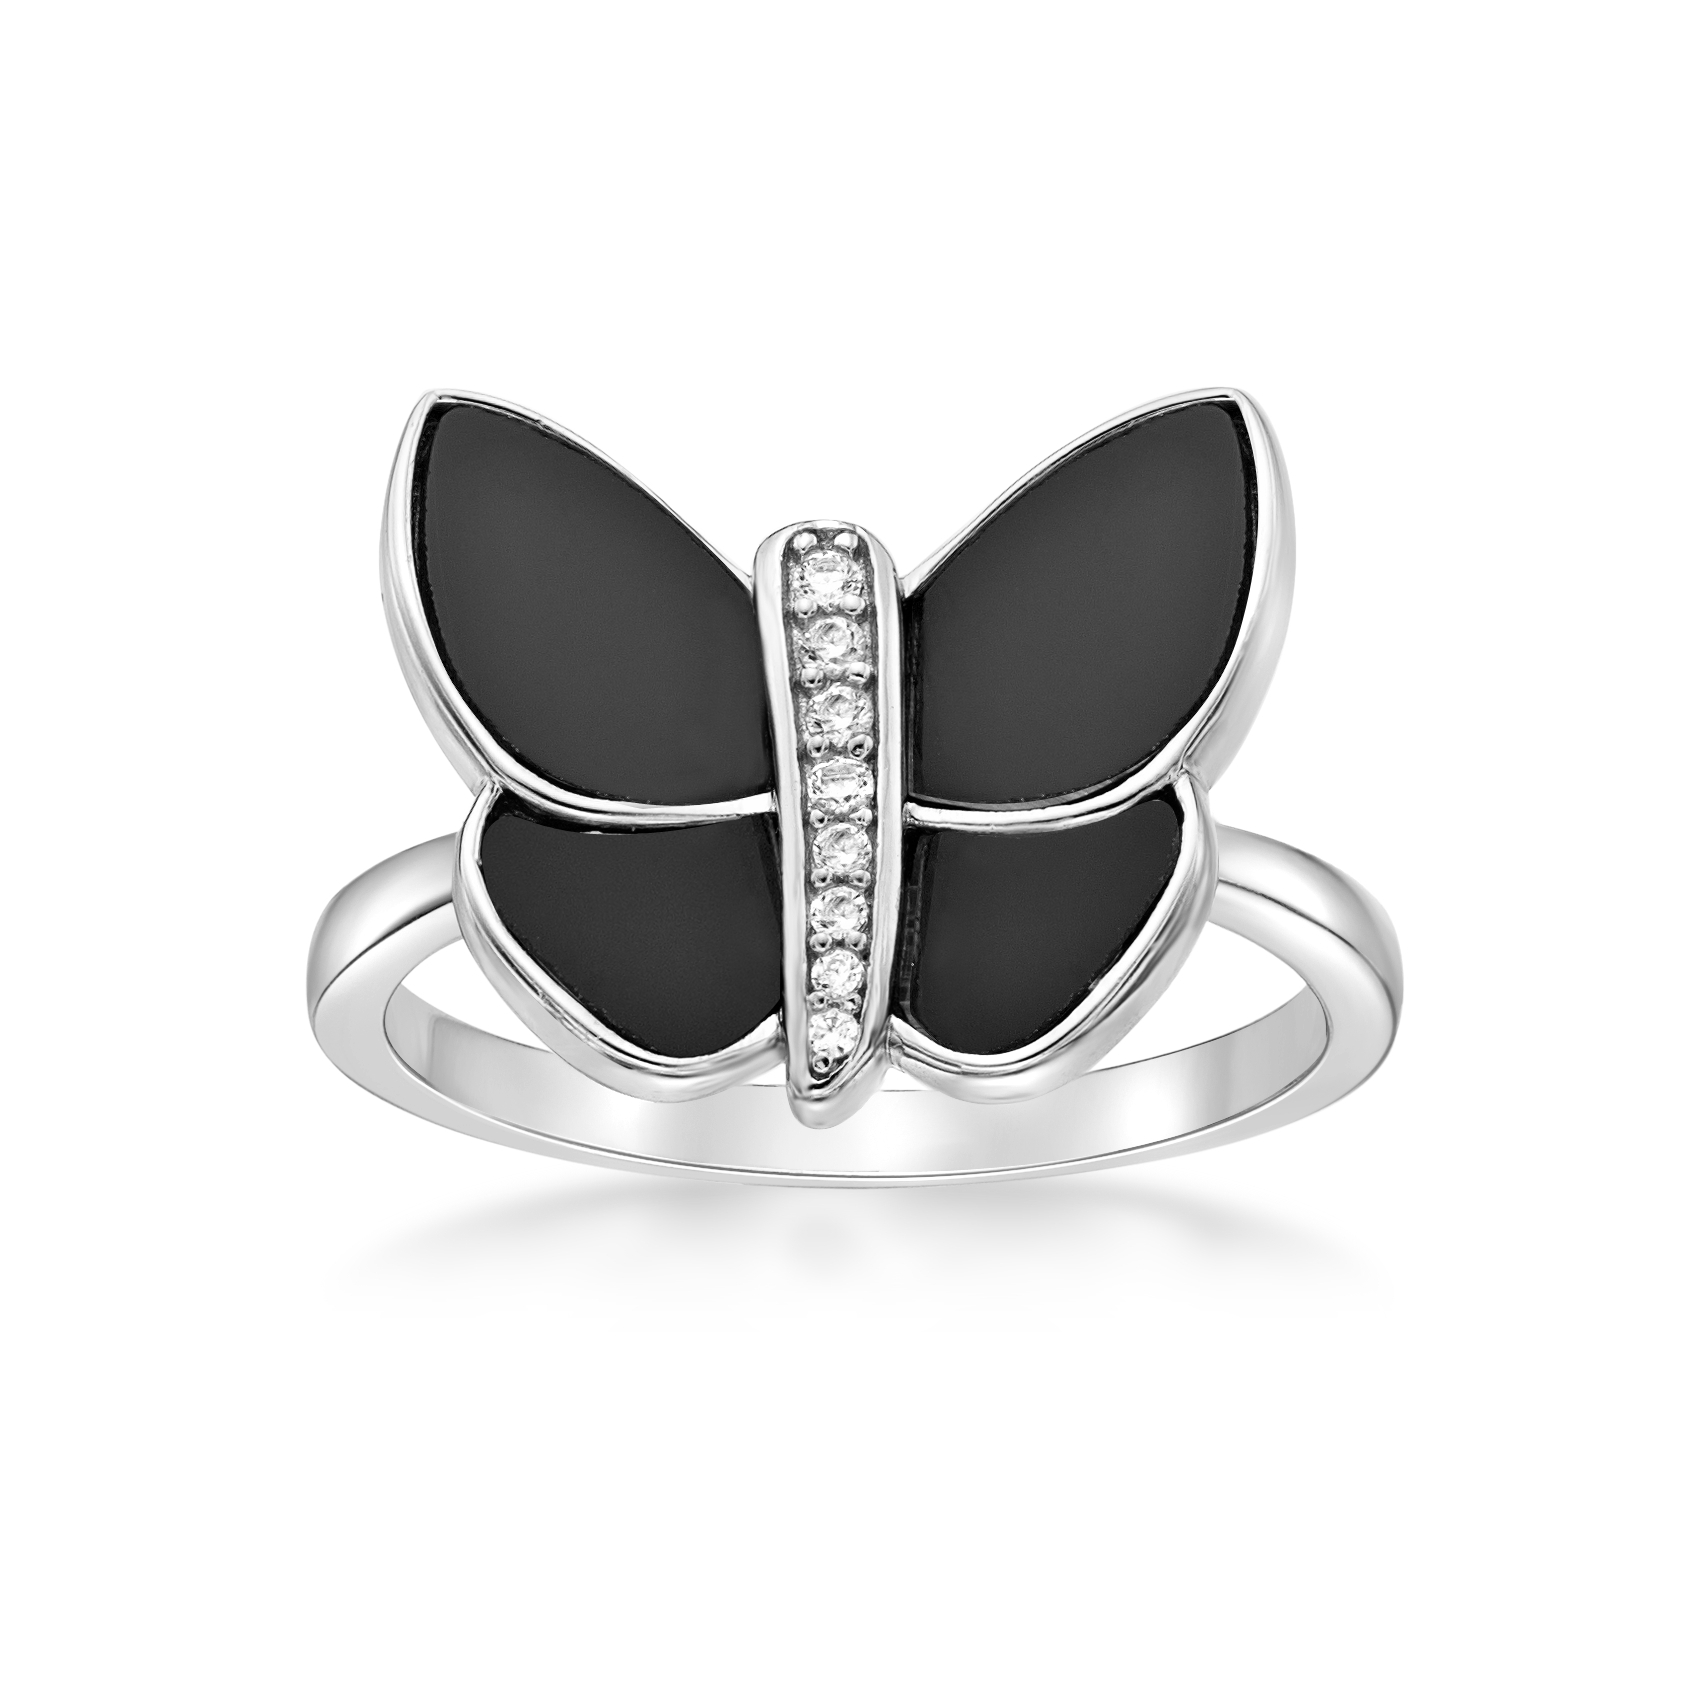 51164-ring-default-collection-sterling-silver-51164-6.jpg